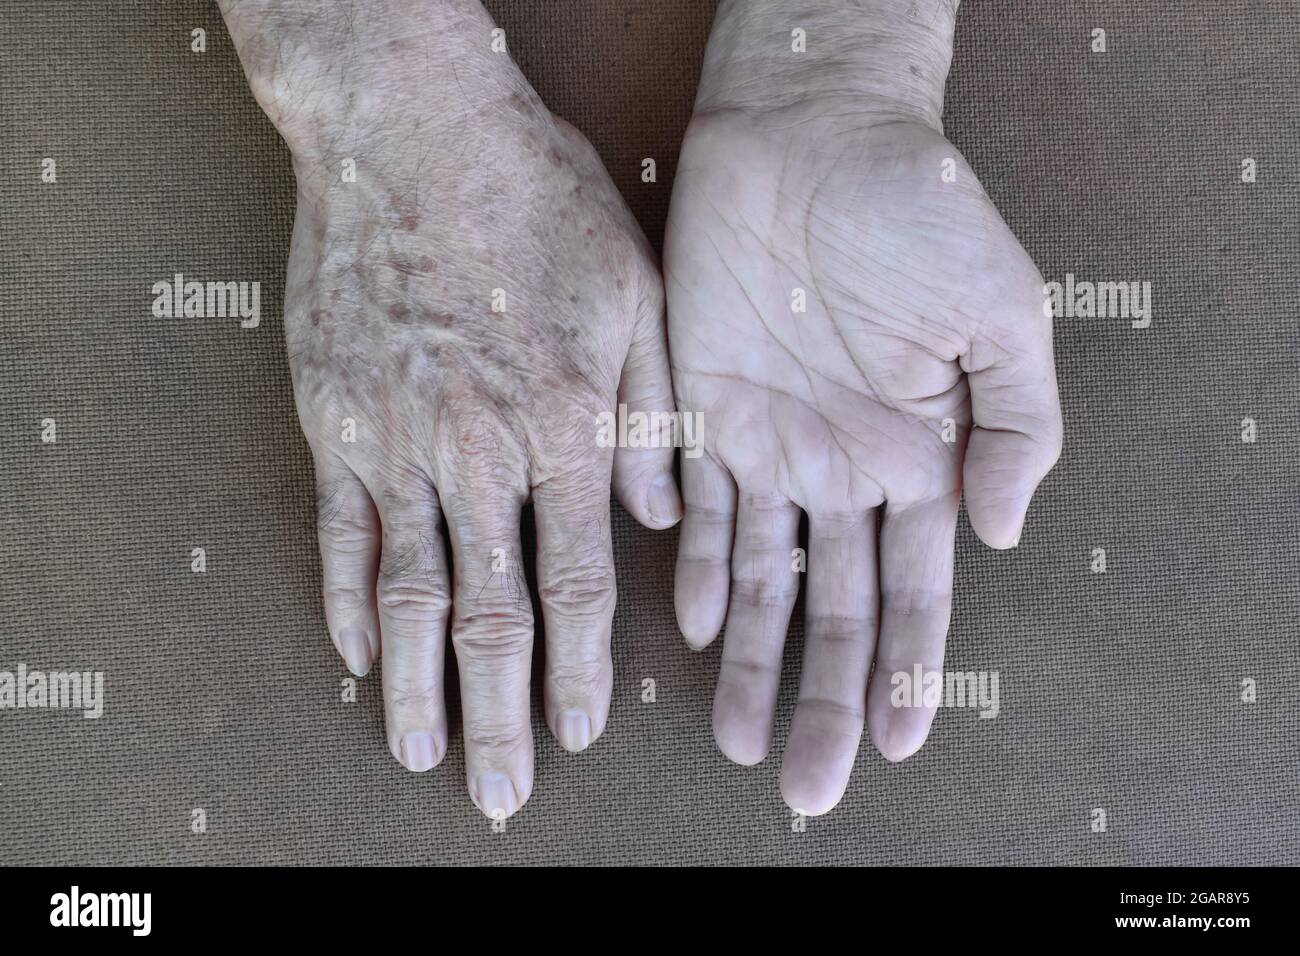 Pale palmar and dorsal surfaces of both hands. Anaemic hands of Asian, Chinese man. Isolated on wooden background. Stock Photo